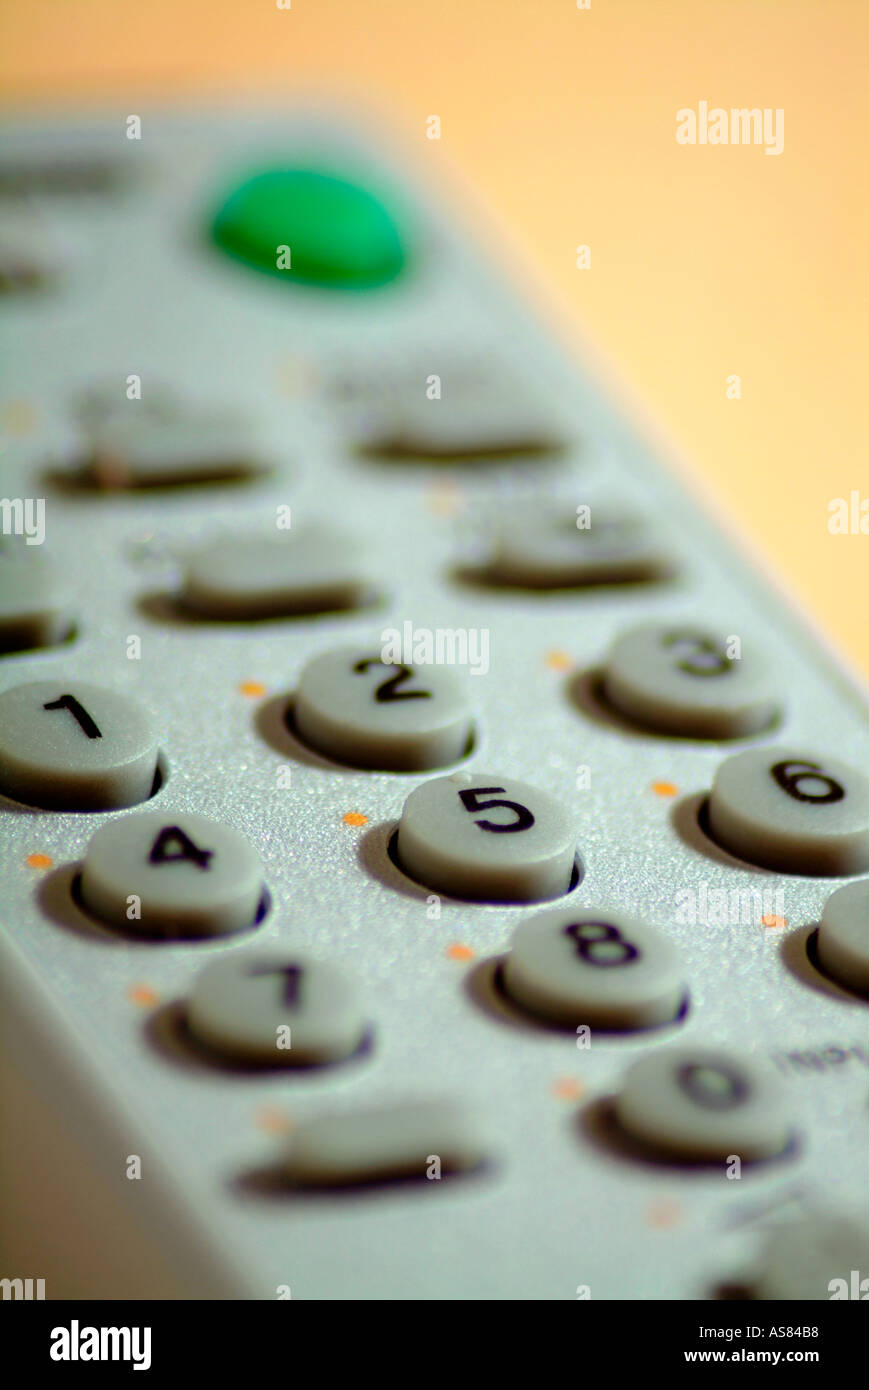 tv remote control detail Stock Photo